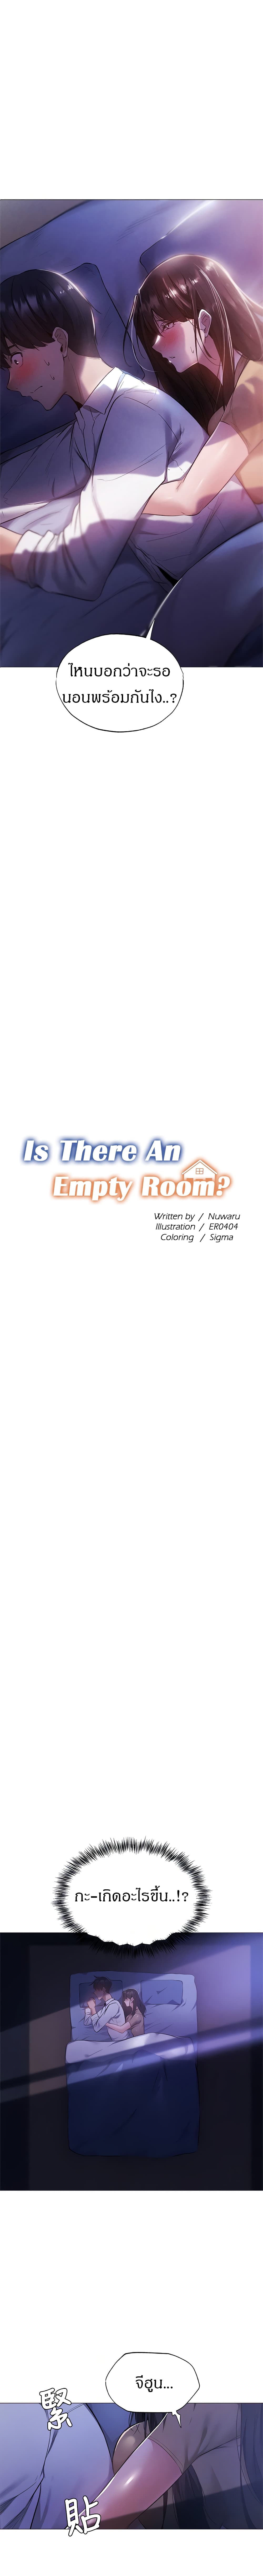 Is There an Empty Room 36 (3)